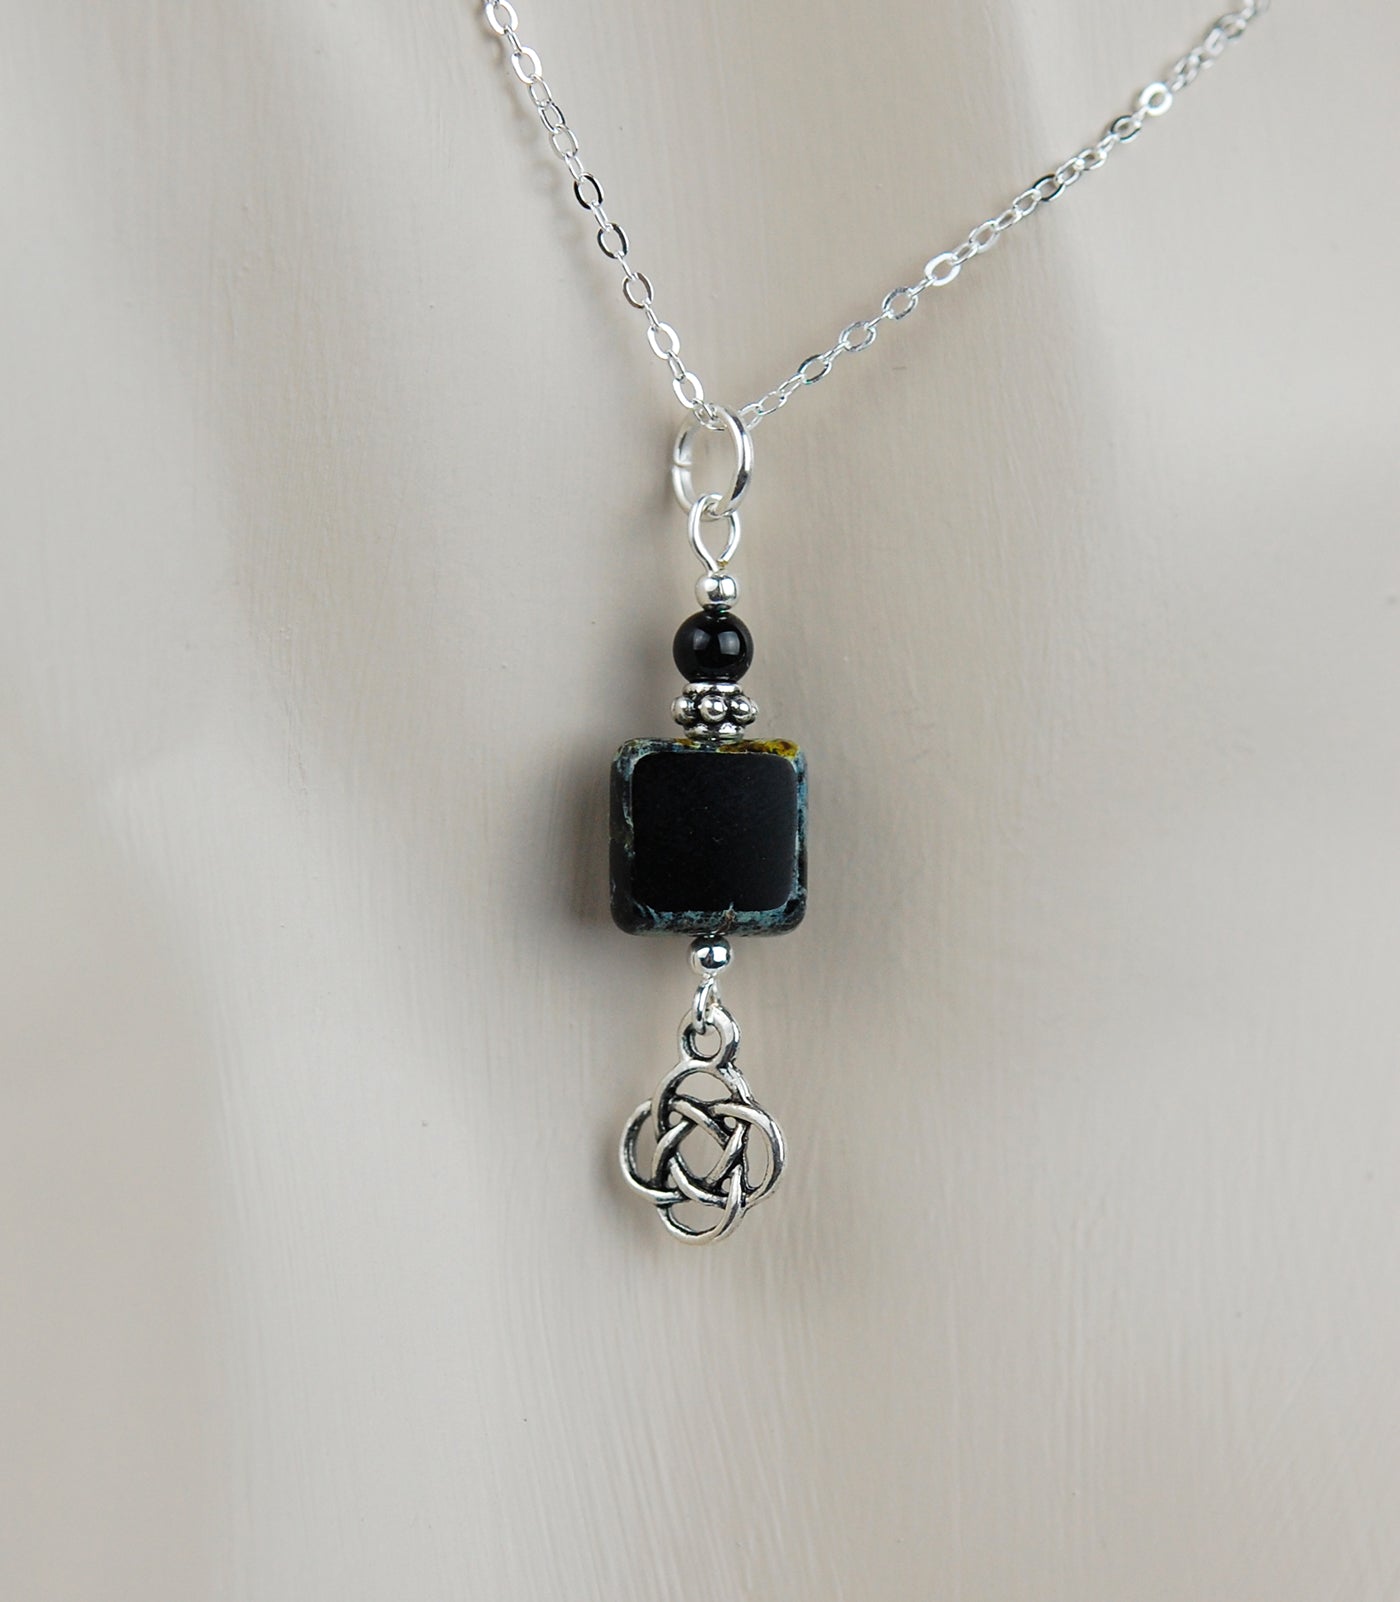 Black Onyx with Picasso tile bead